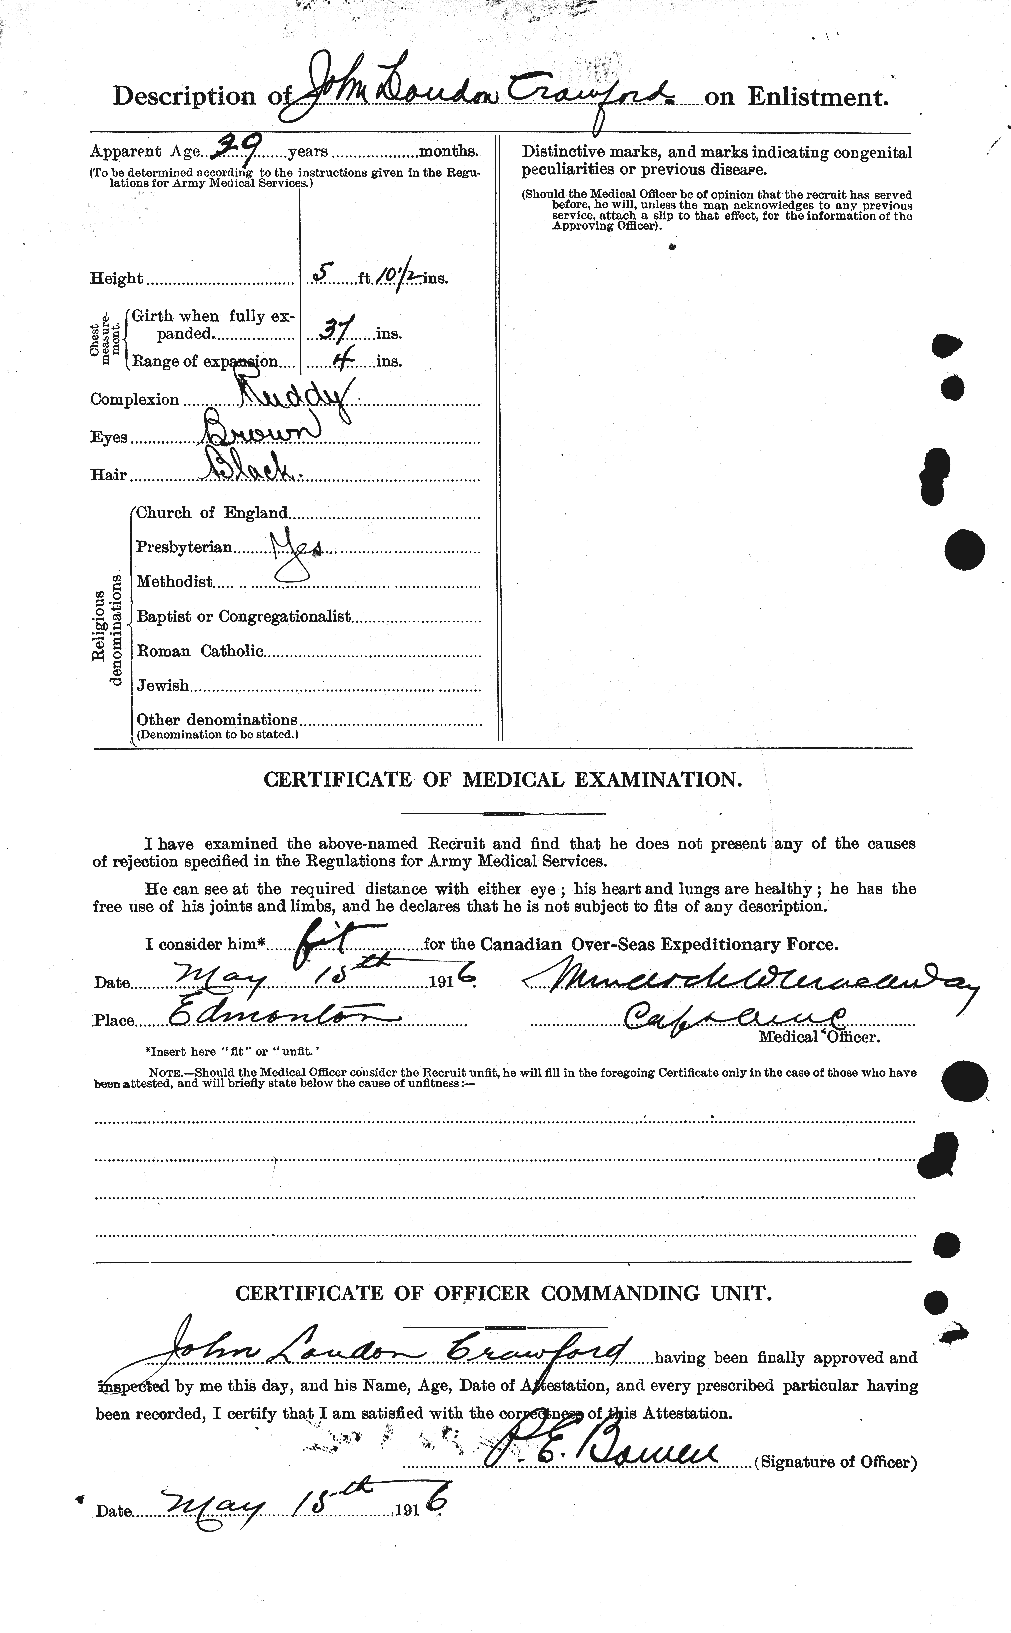 Personnel Records of the First World War - CEF 061828b